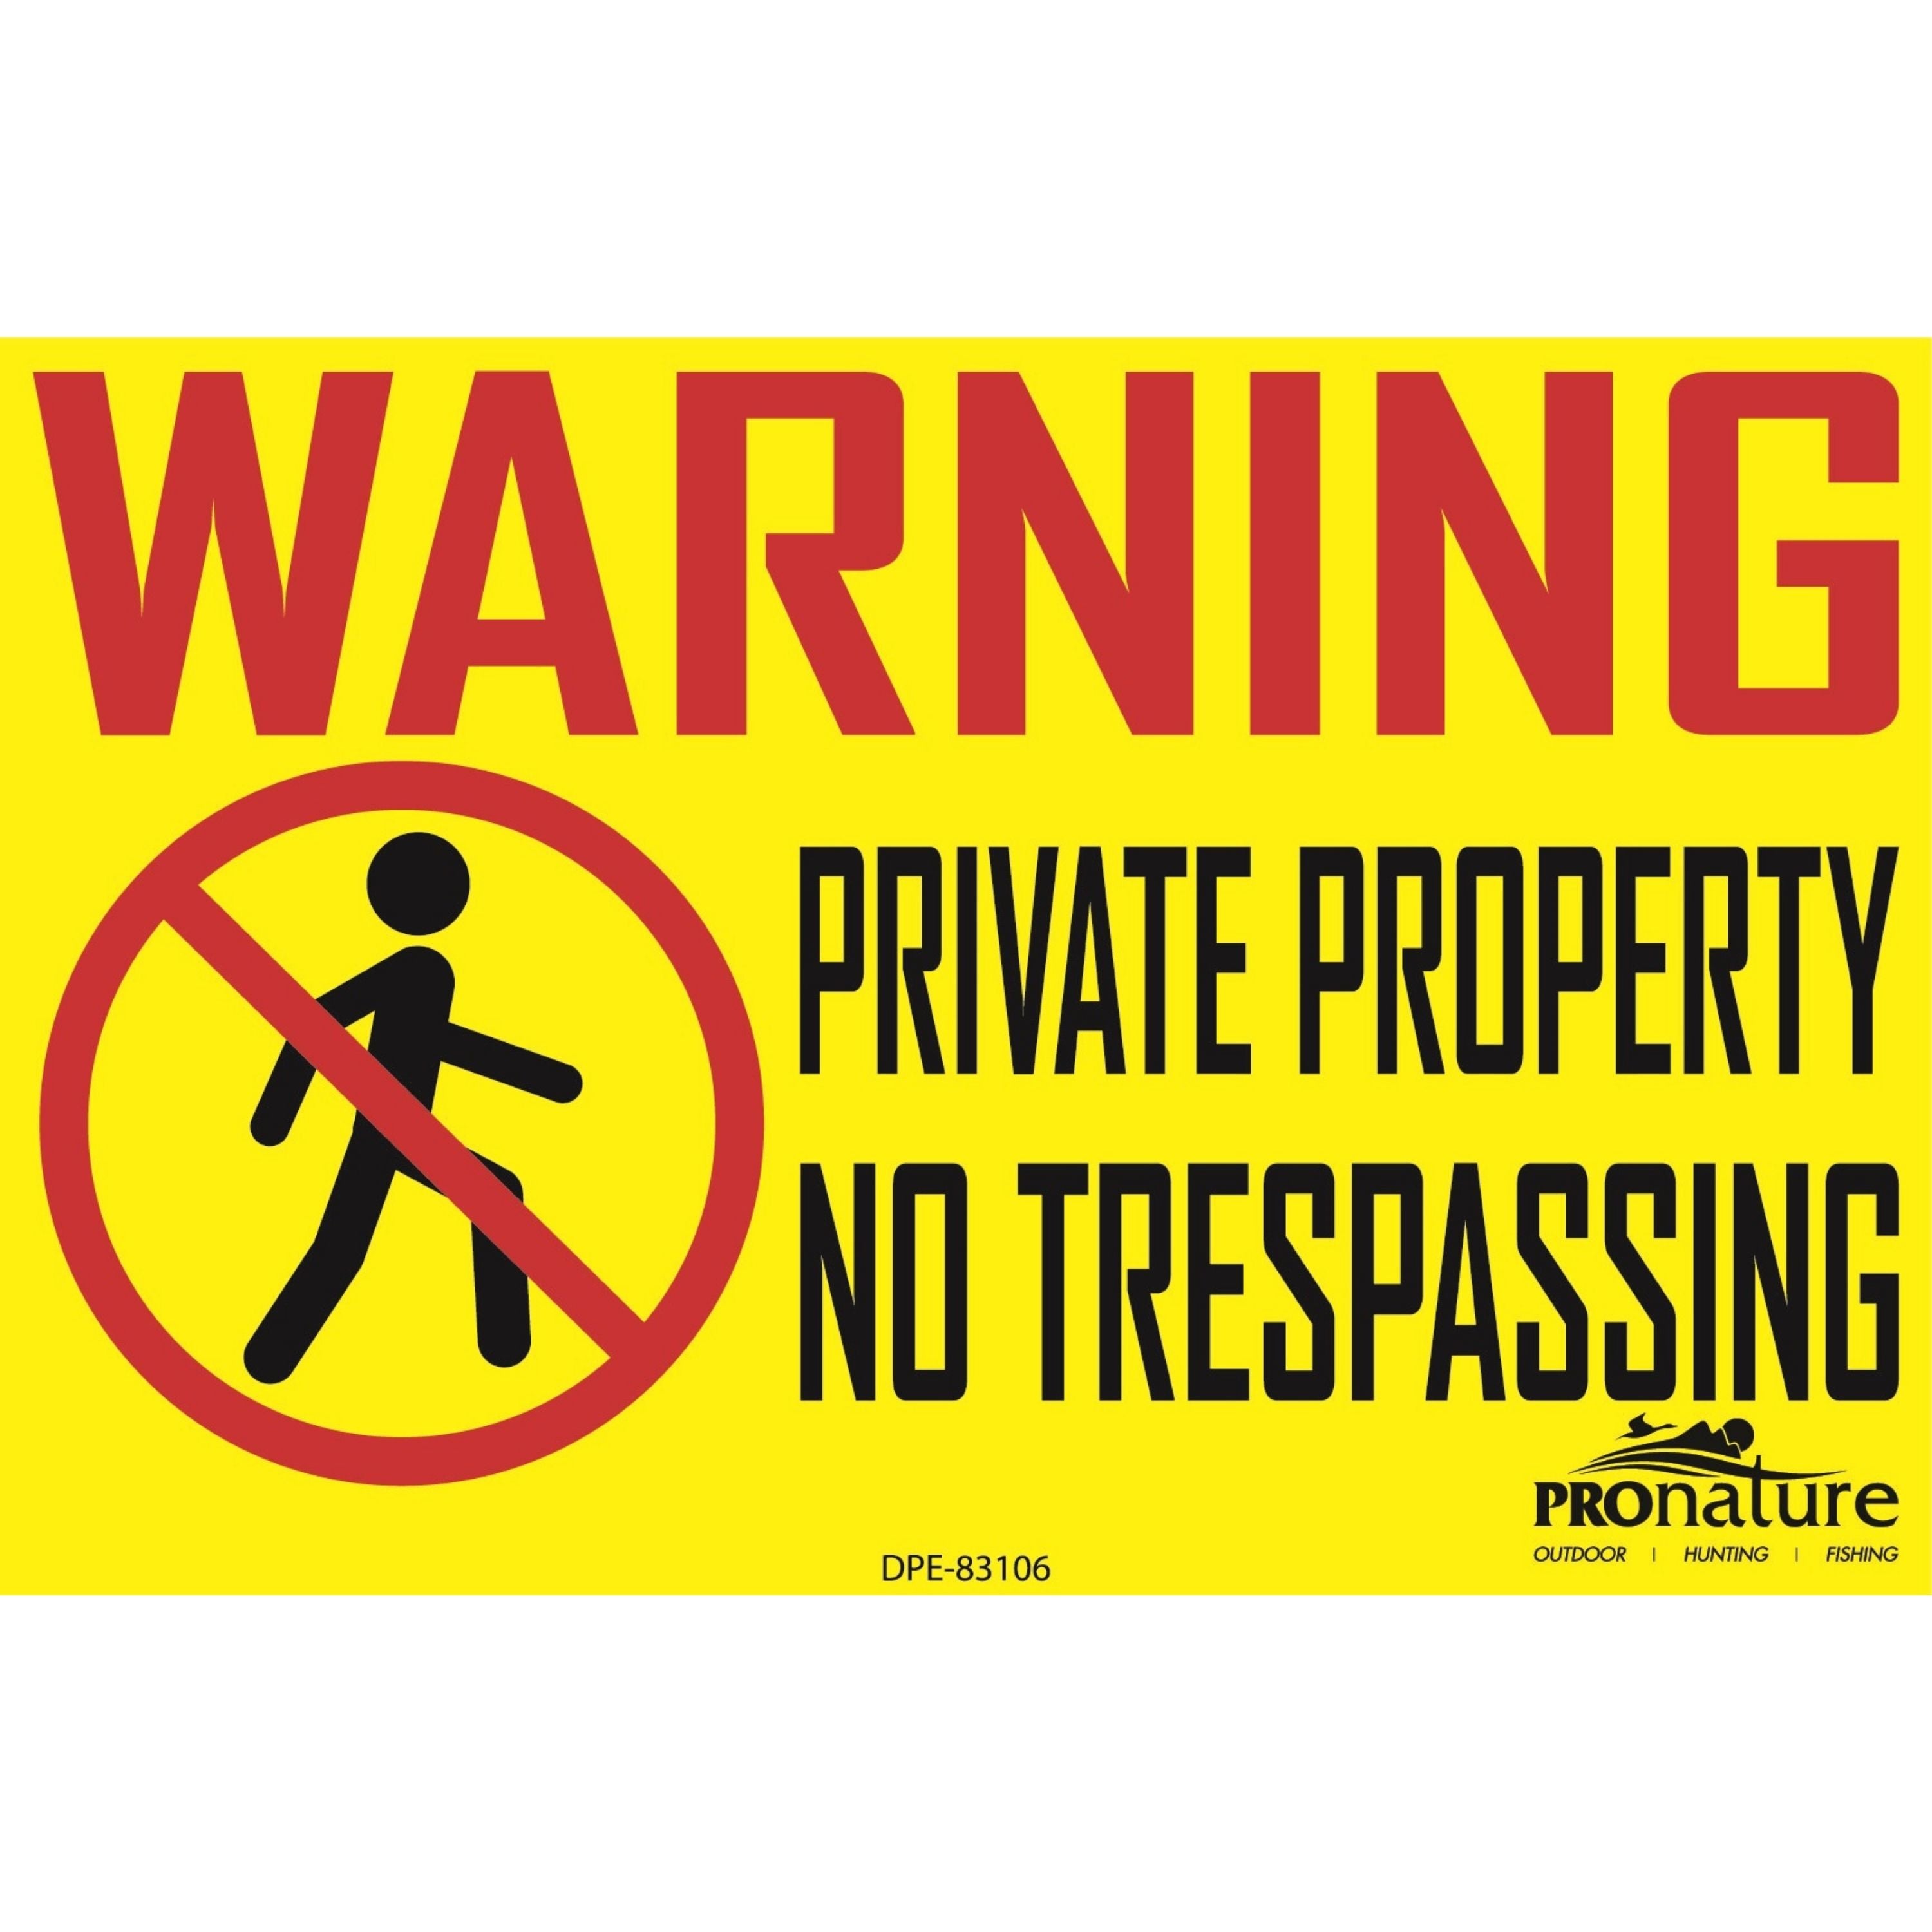 “Warning private property” sign